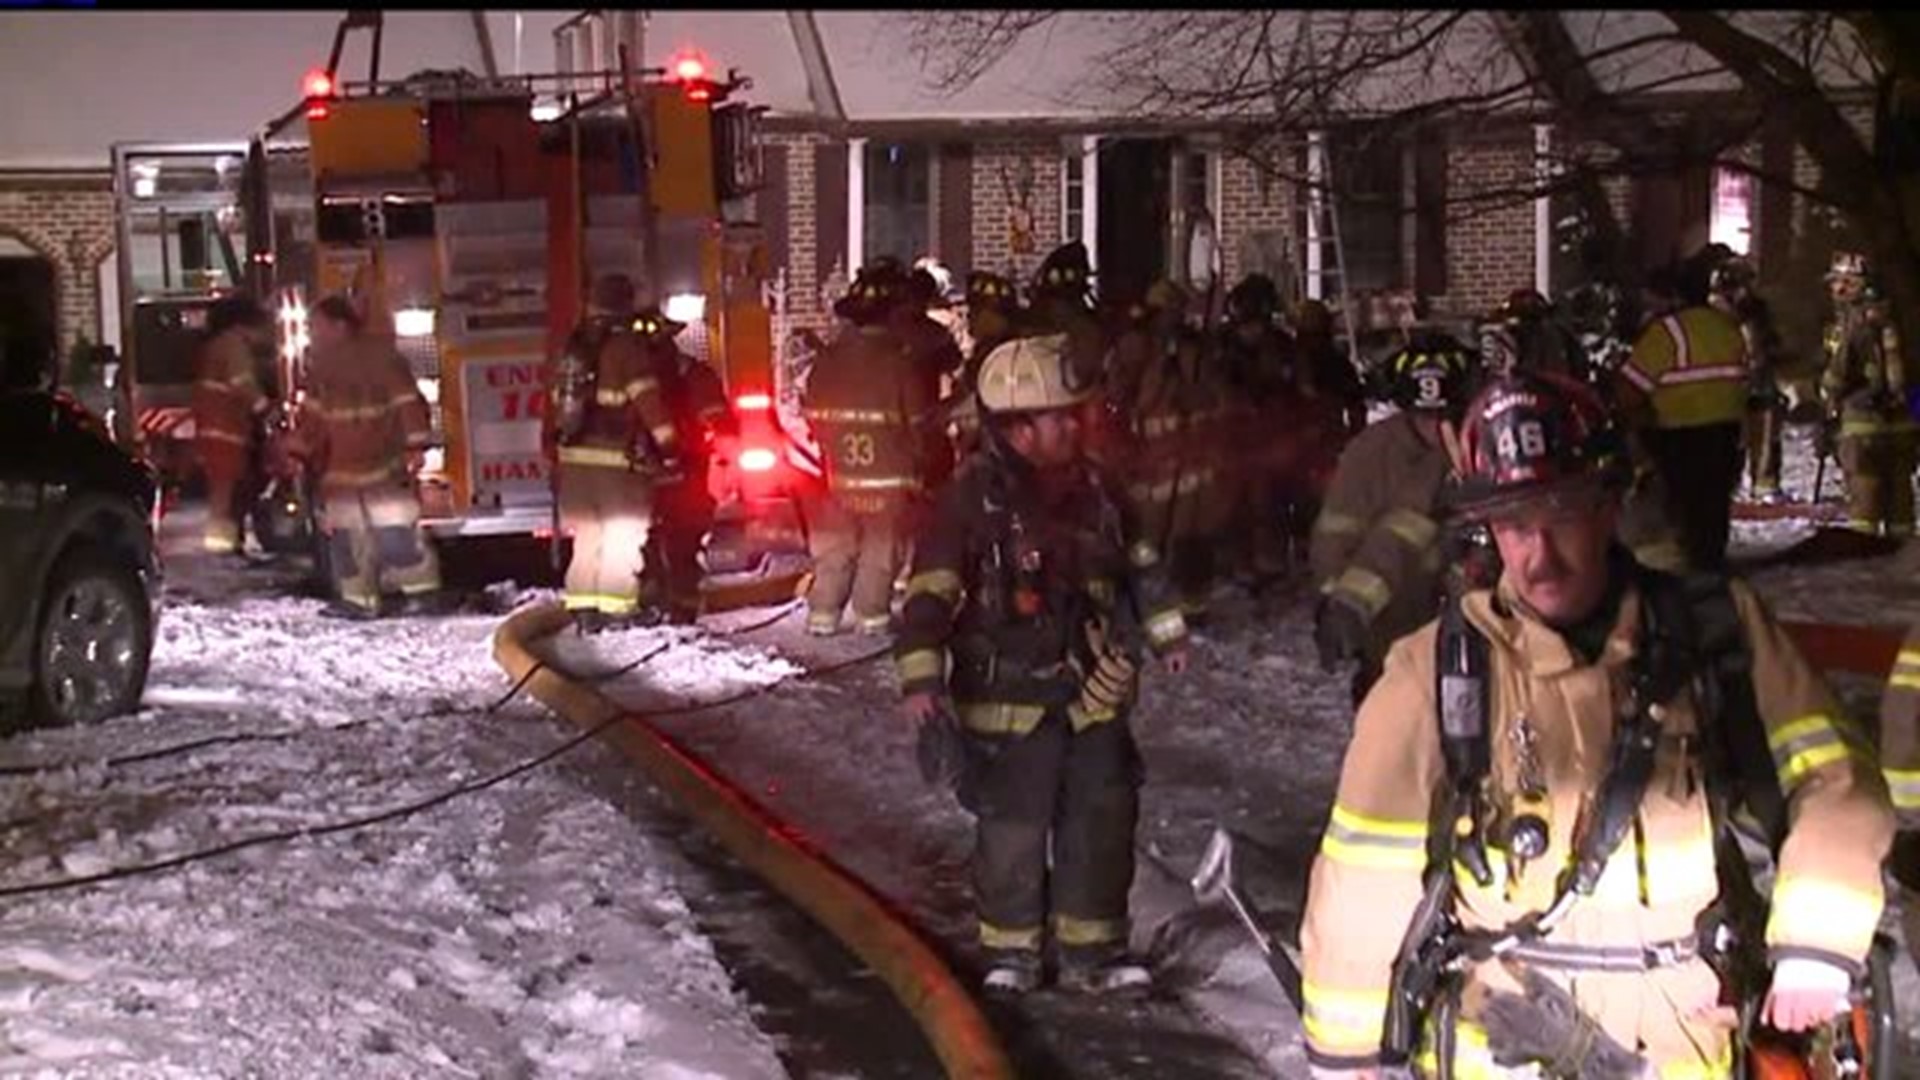 Crews respond to a fire at an Adams County home